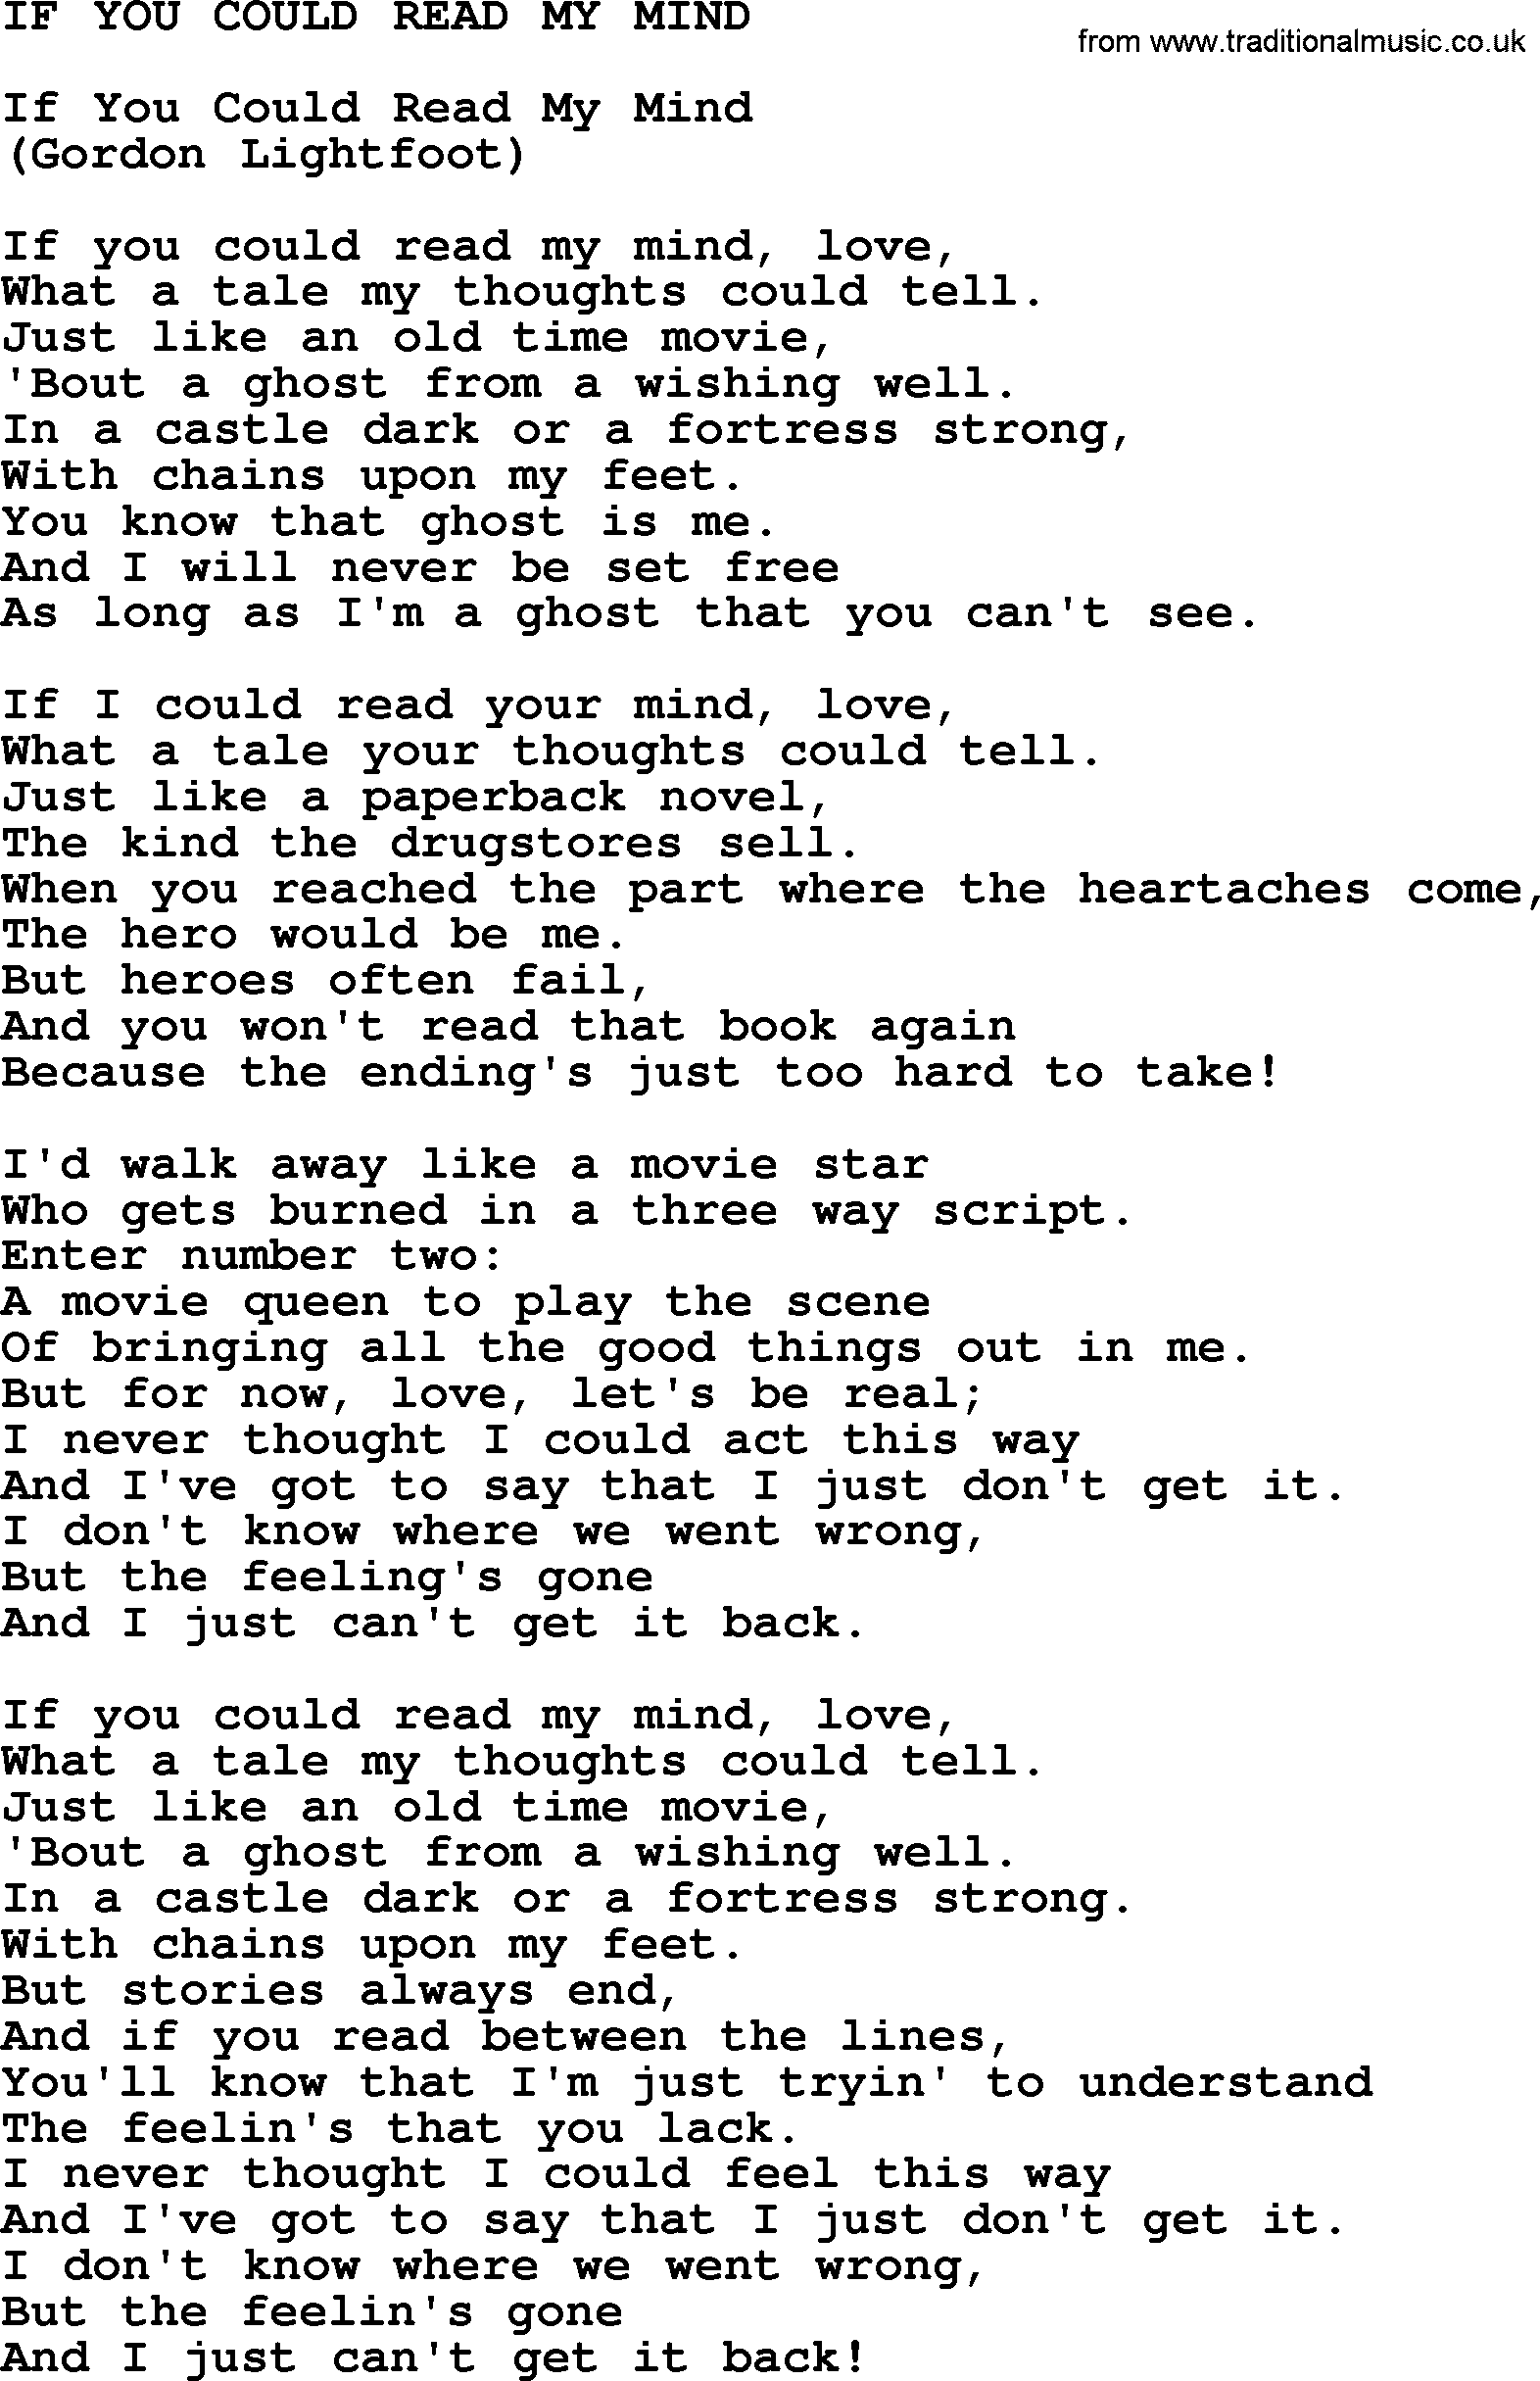 Johnny Cash song If You Could Read My Mind.txt lyrics